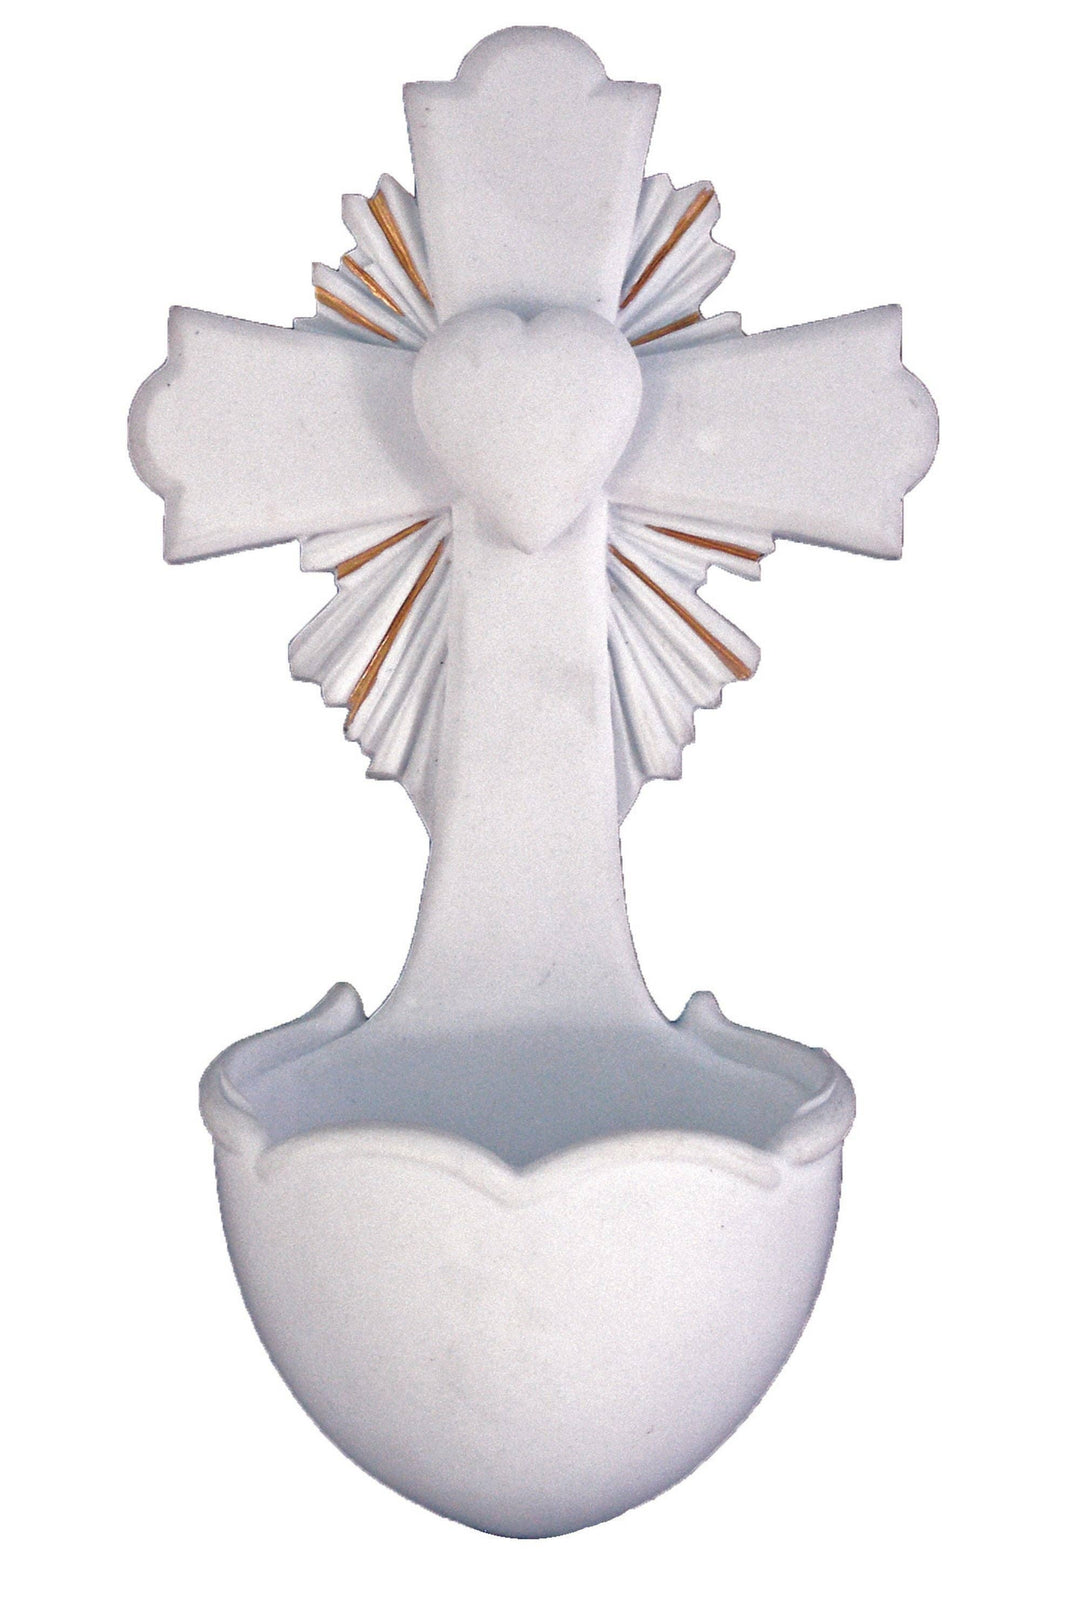 Crucifixion Heart Font in White 6"